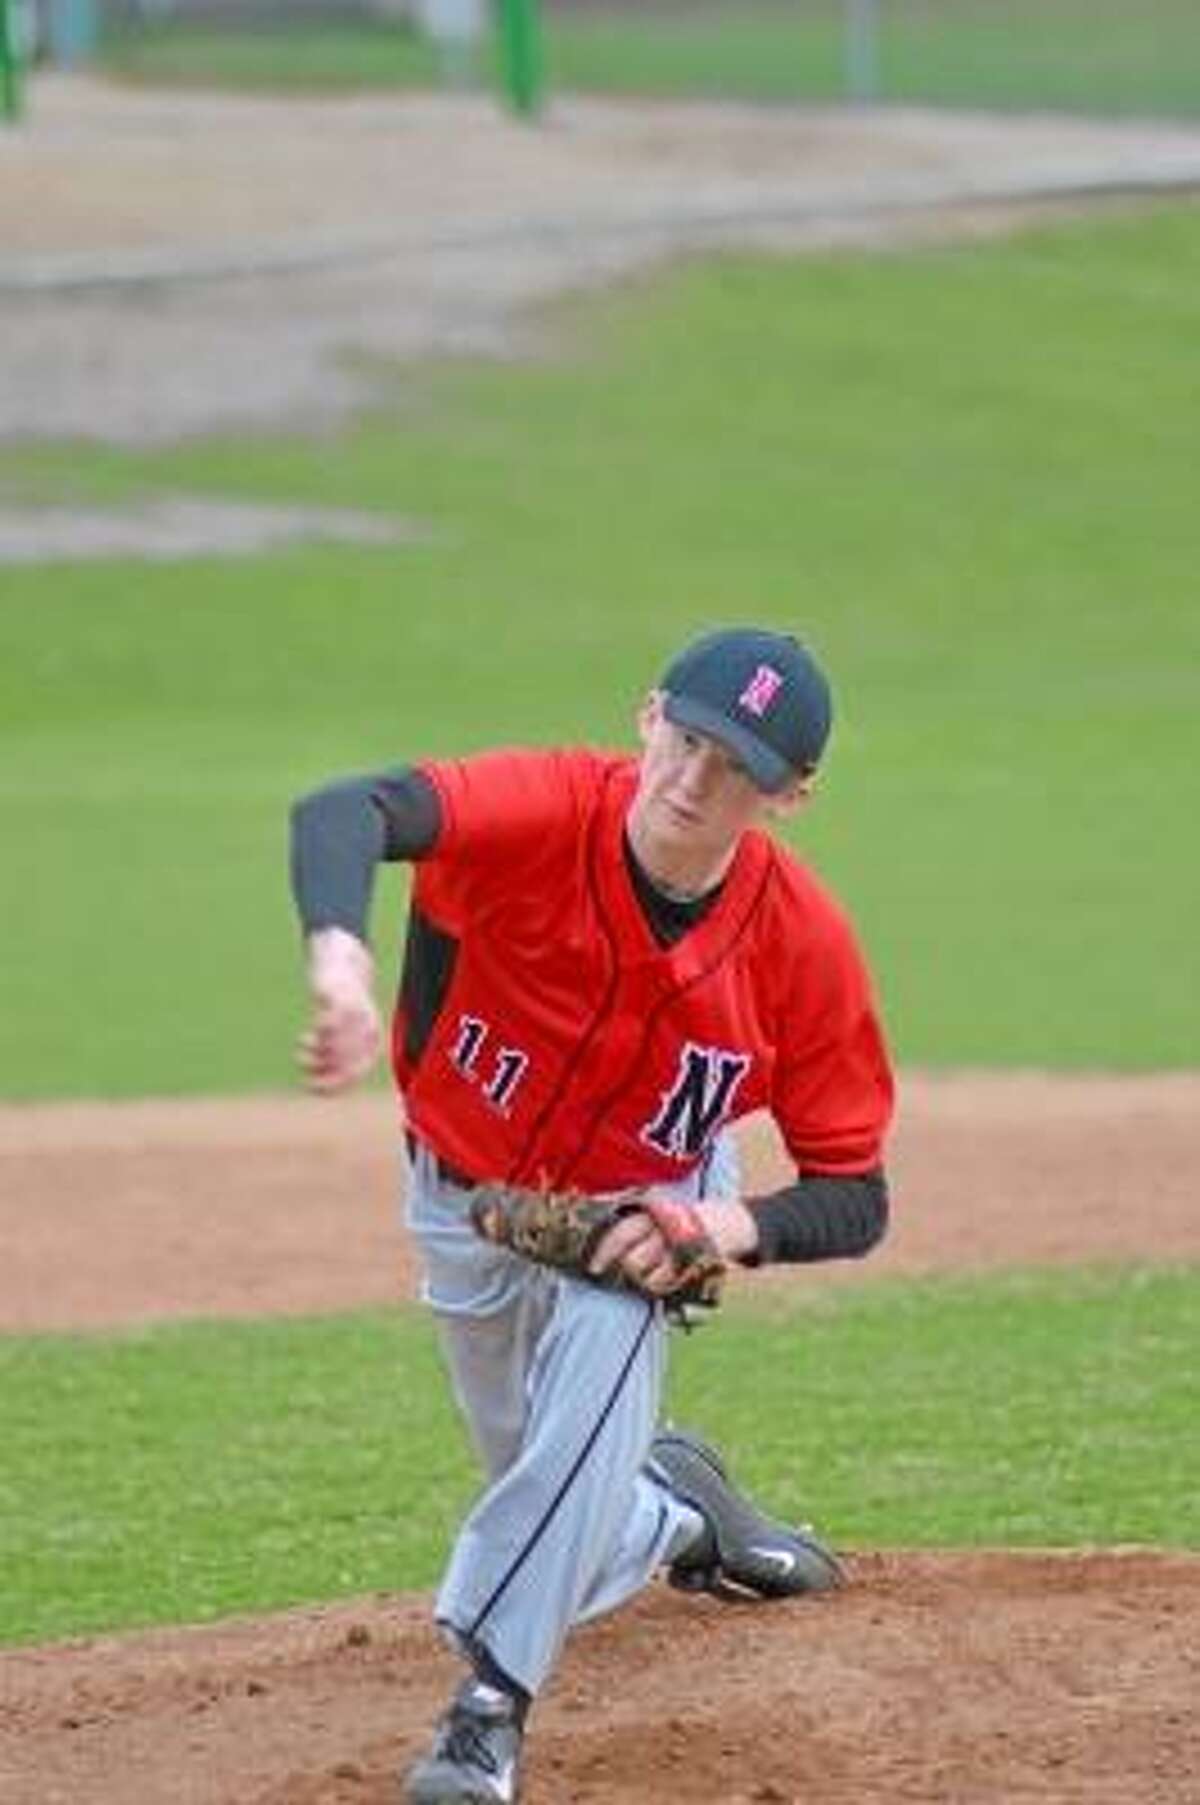 Pete Paguaga/Register Citizen Northwestern's Jimi Phillips, allowed only one hit, while striking out seven batters through seven innings, getting the win.